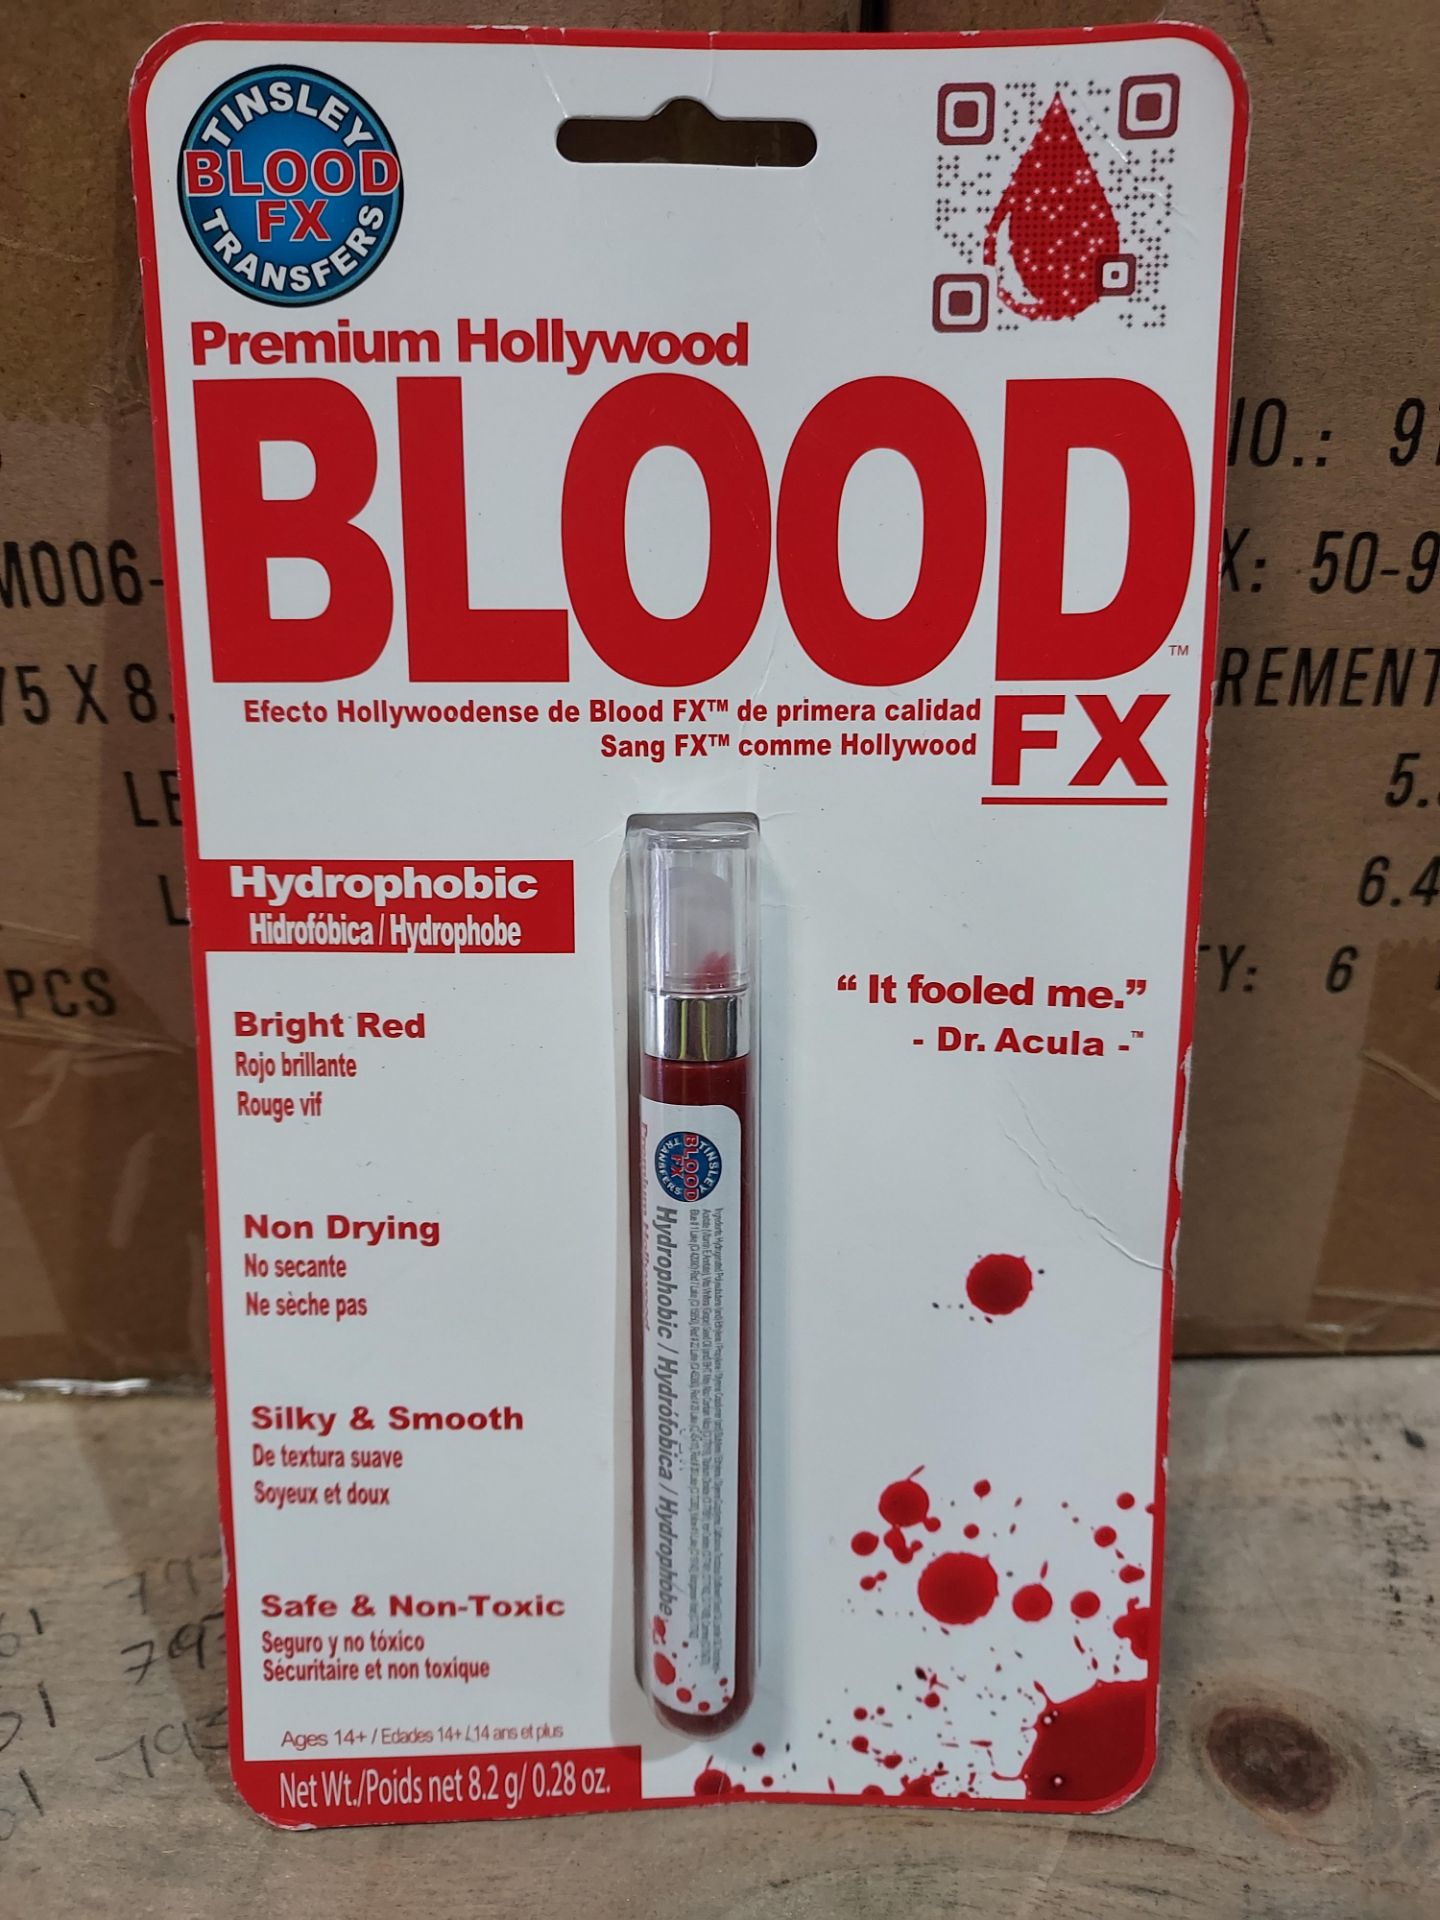 17 X BRAND NEW PREMIUM HOLLYWOOD BLOOD - HYDROPHOBIC - BRIGHT RED - NON DRYING - SAFE AND NON